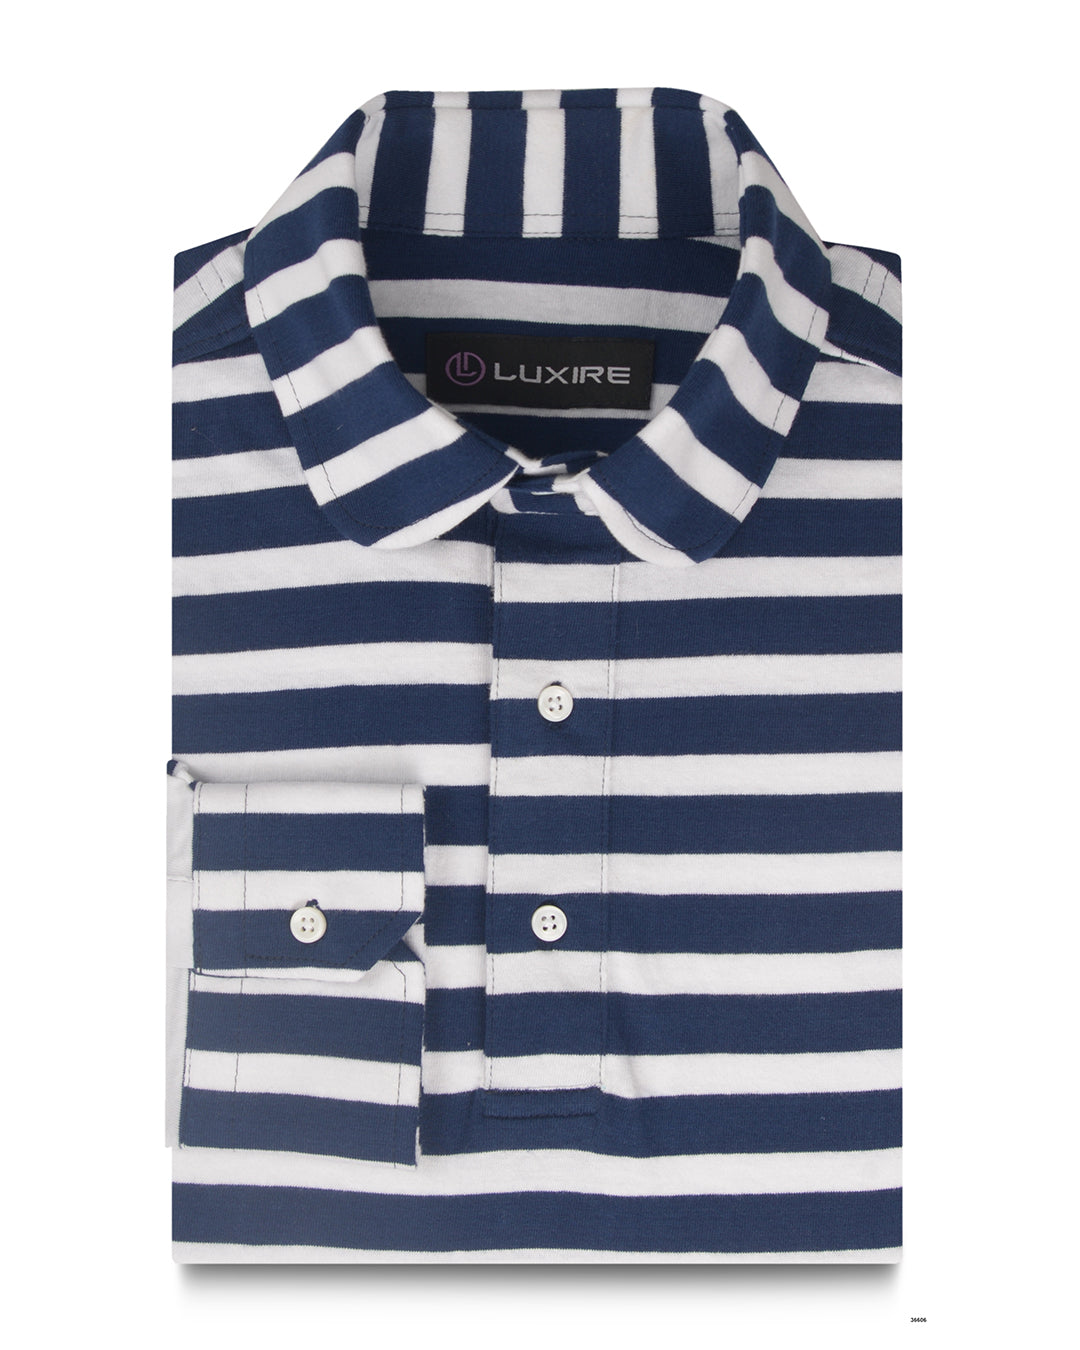 Front of the custom oxford polo shirt for men by Luxire in colbalt blue and white stripes